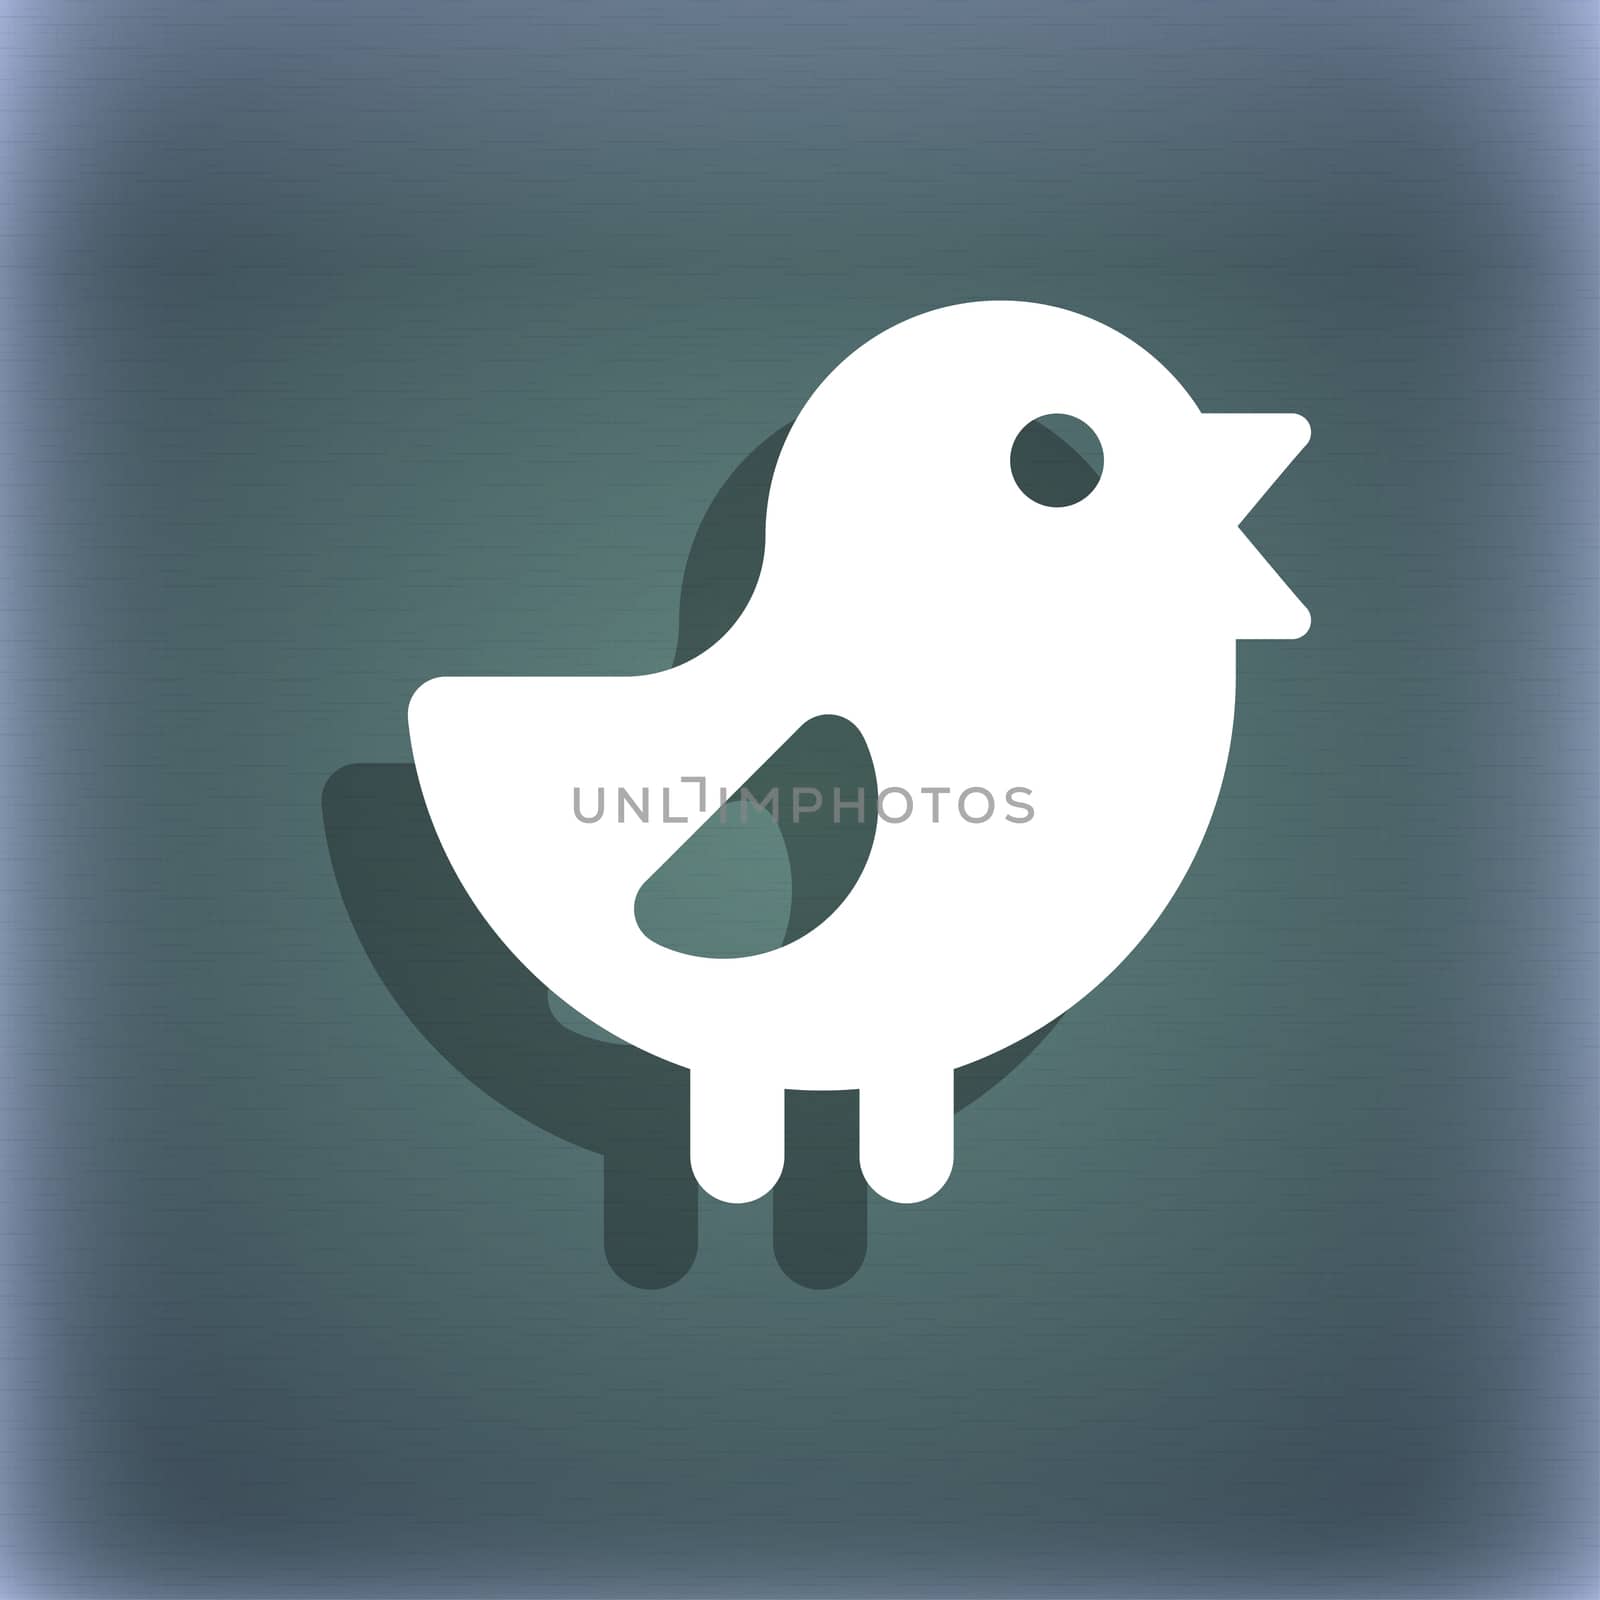 chicken, Bird icon symbol on the blue-green abstract background with shadow and space for your text. illustration